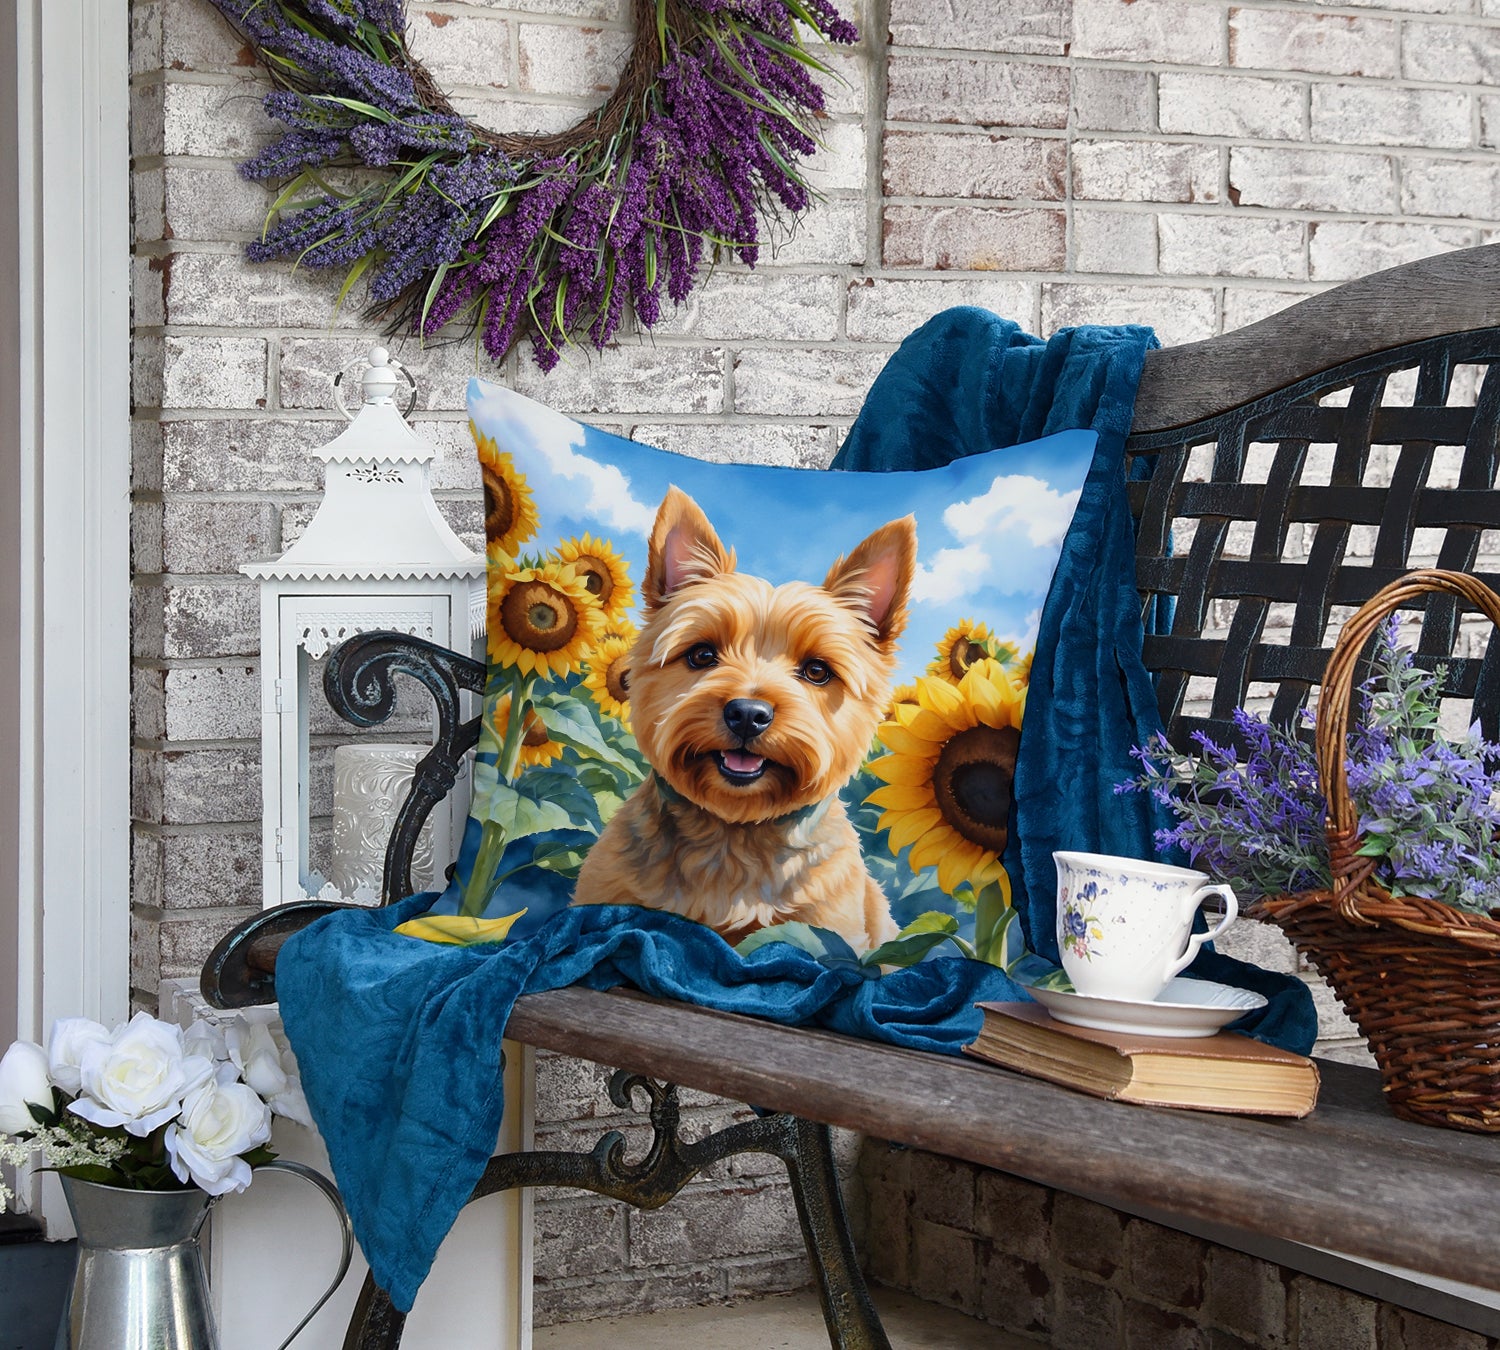 Norwich Terrier in Sunflowers Throw Pillow